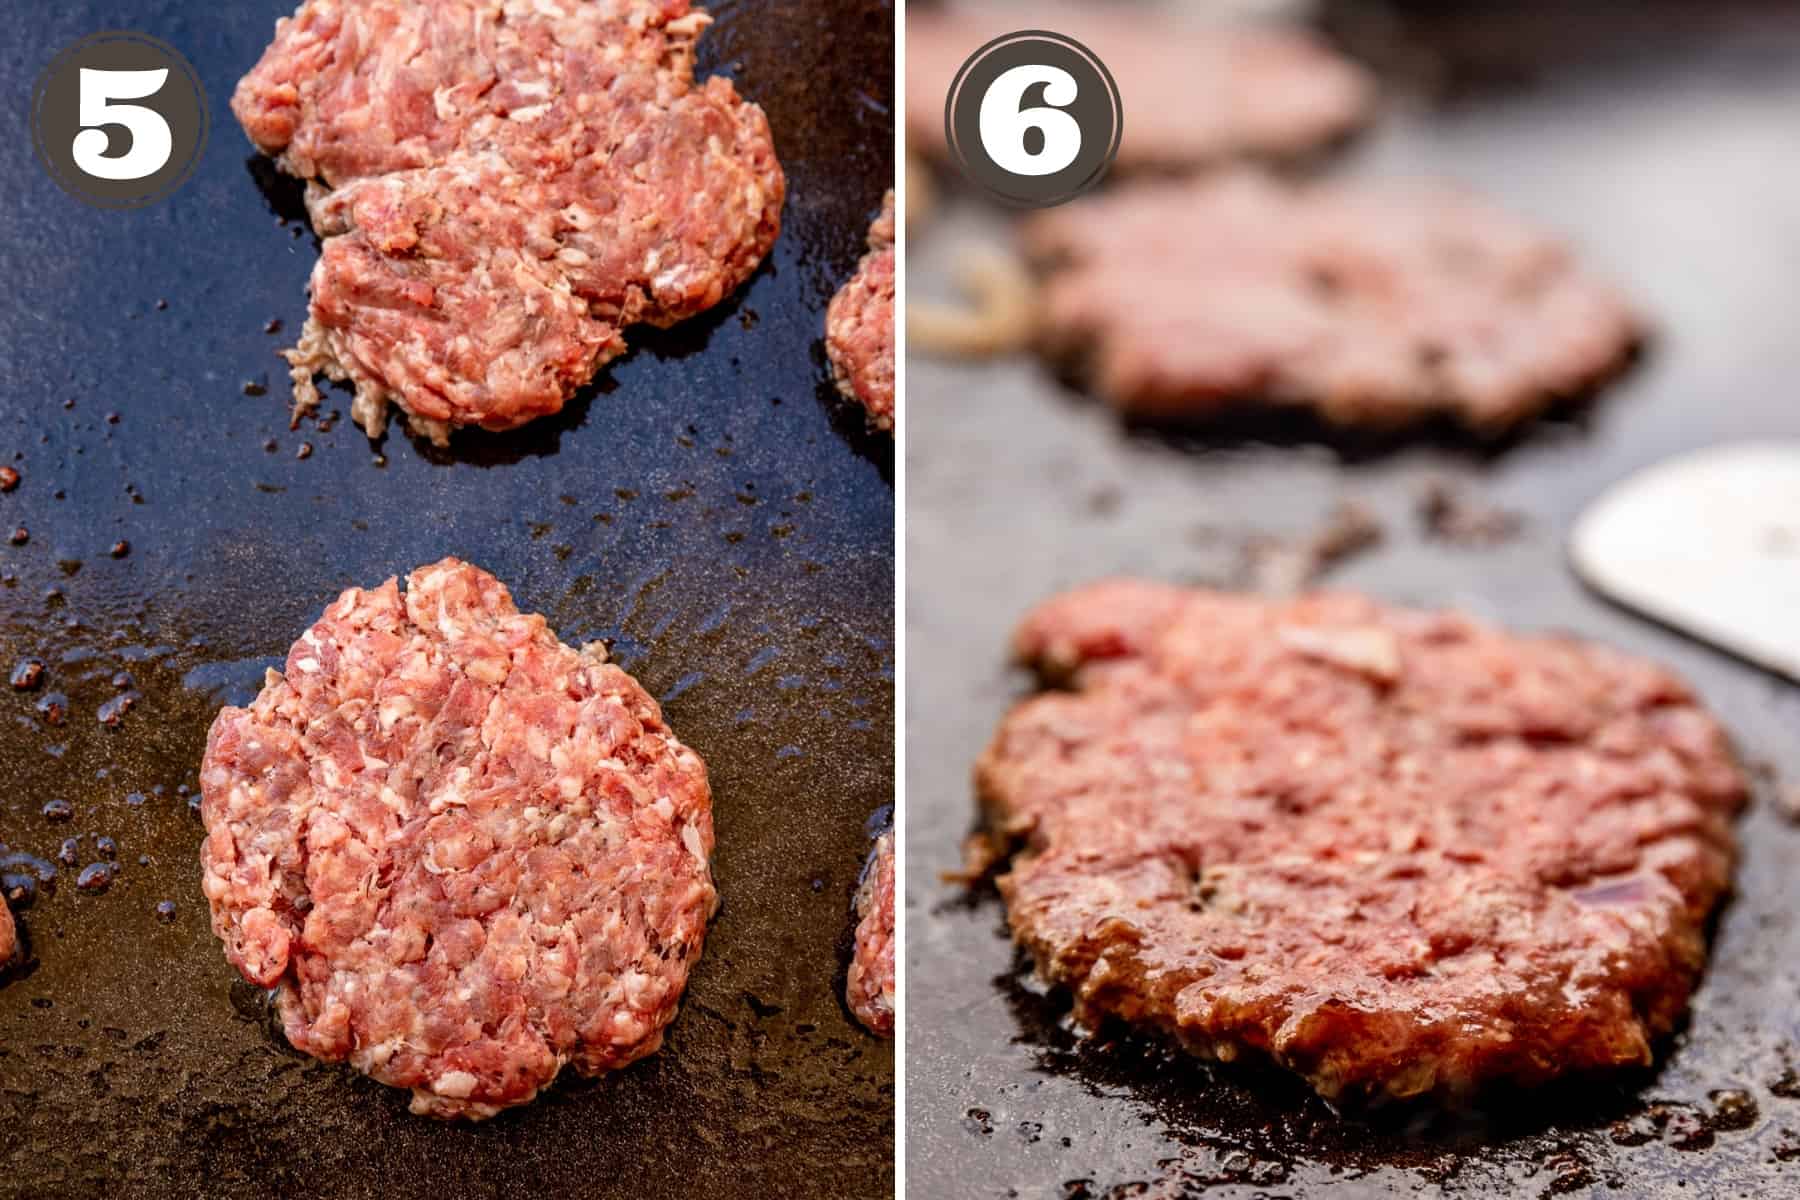 Side by side photos showing balls of meat added to a hot griddle and being smashed with a metal spatula.